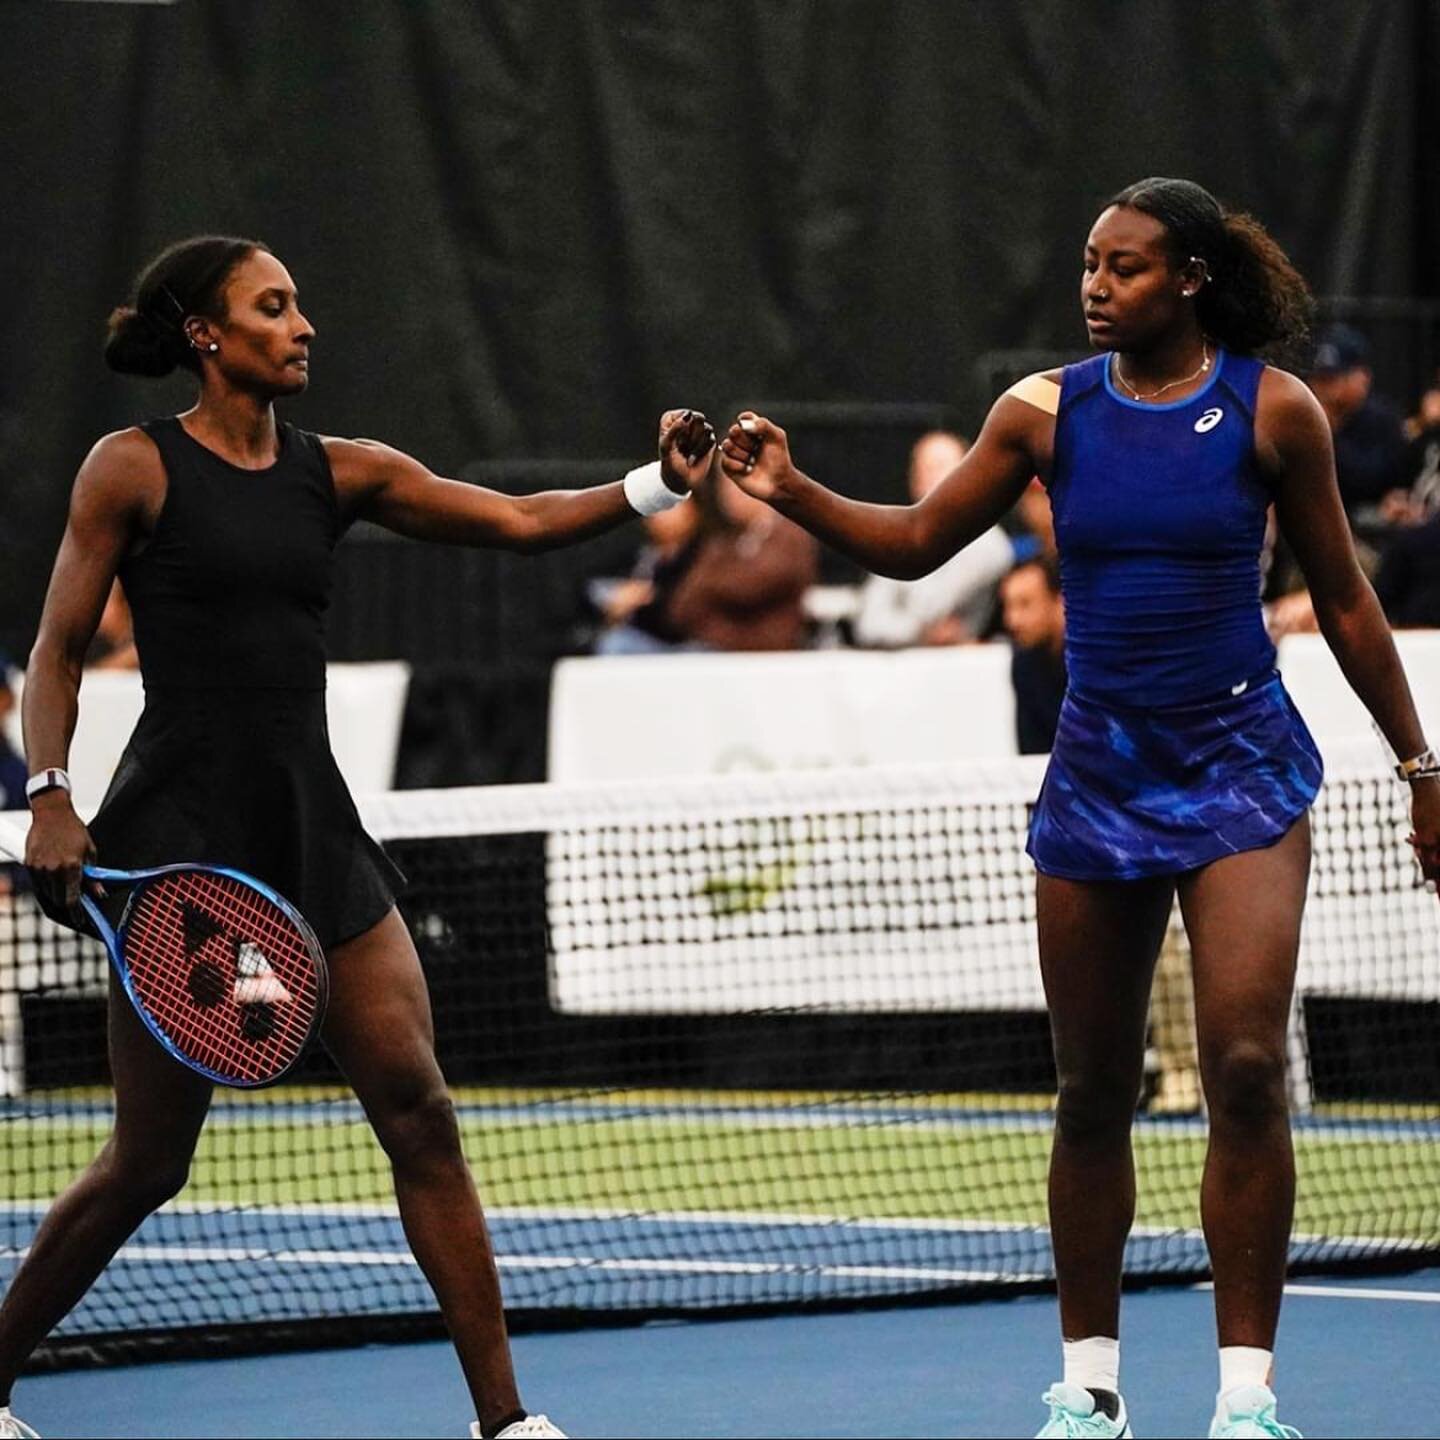 To wrap up a full day of Tennis Asia Muhammad and Alycia Parks fought a tough match against Ashlyn Krueger and Robin Montgomery. Muhammad/Parks came out victorious going 3-6, 6-1 and 10-8. The pair will be moving on to the doubles final! 

Don't miss